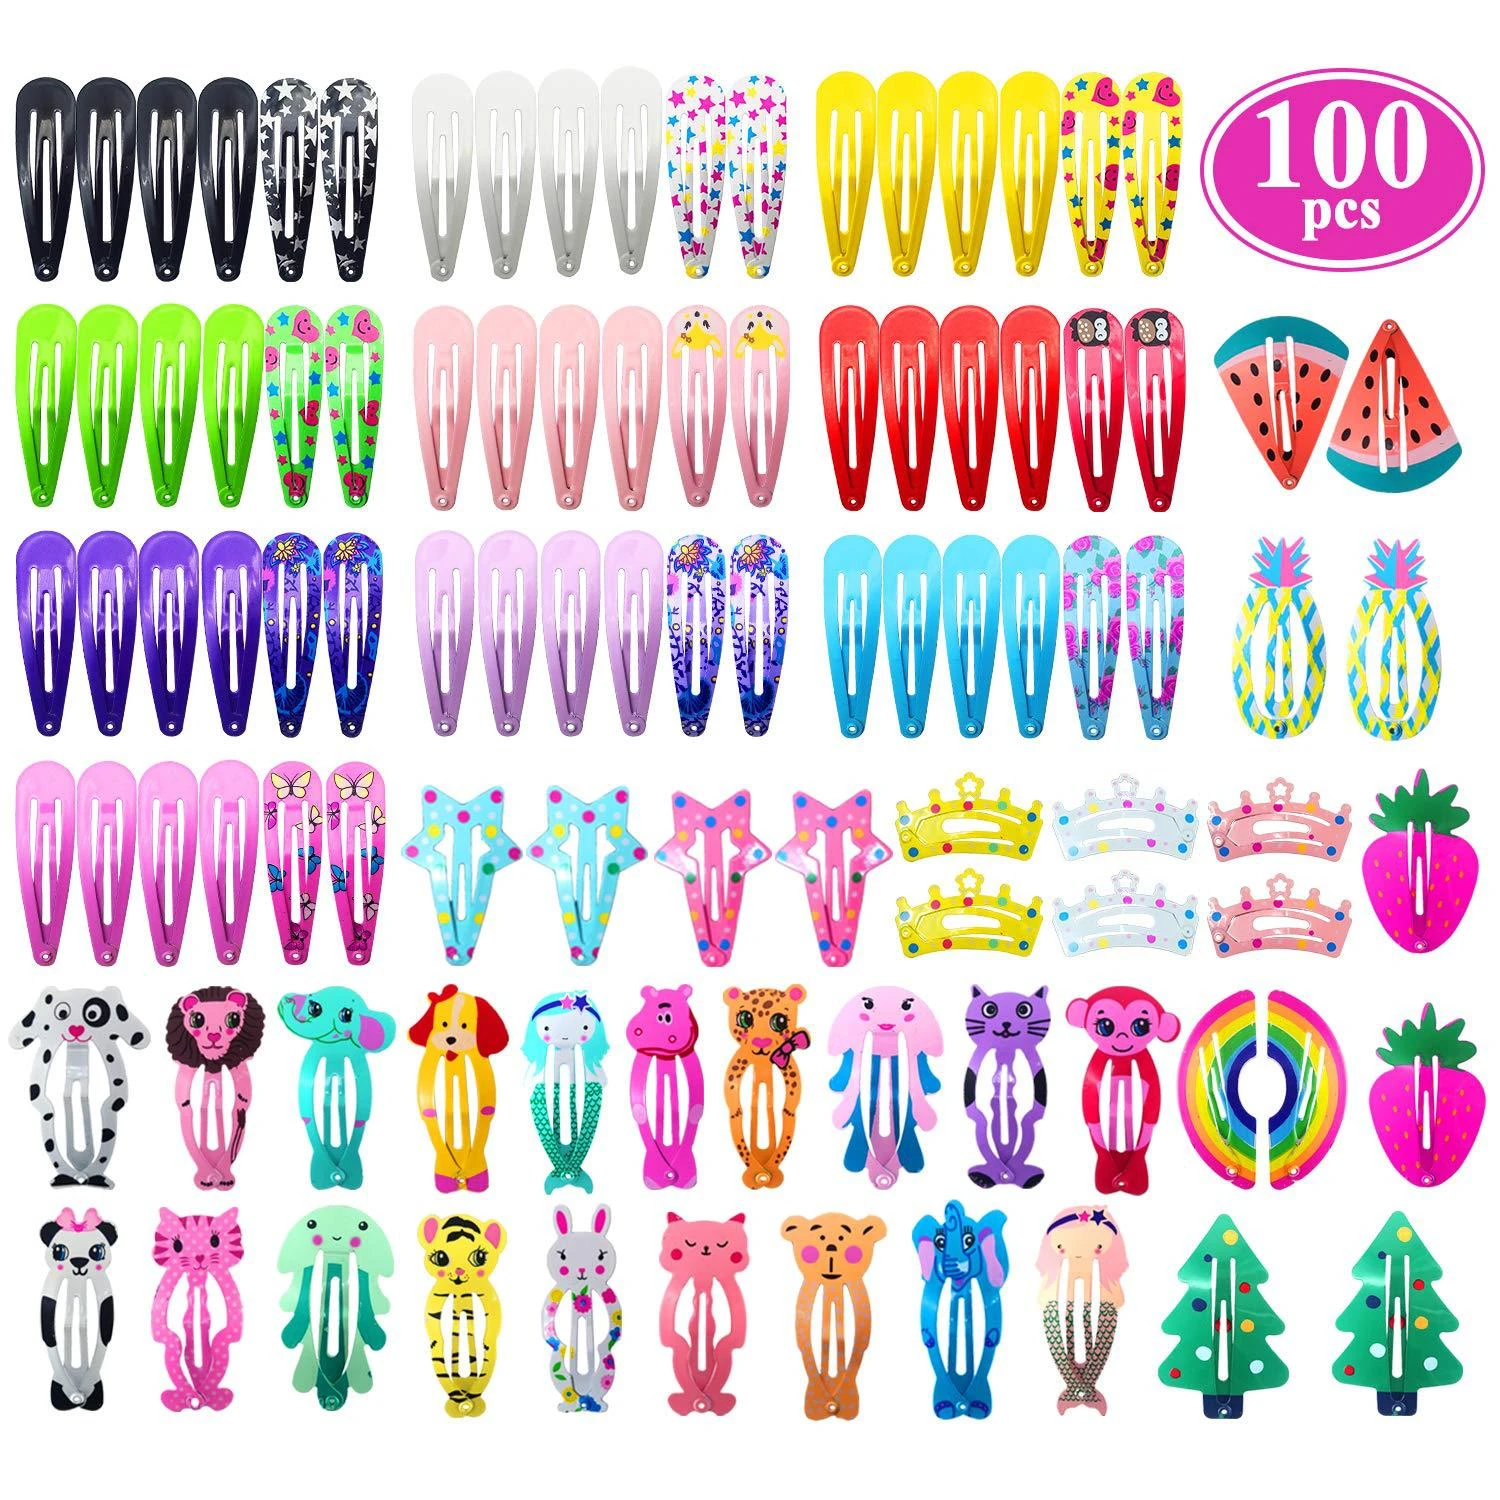 6/25/60/100pcs Mix Color Different Fruits Prints Random Hairgrip Clip Hairpins Hair Clips for Children Girls Accessories YB003